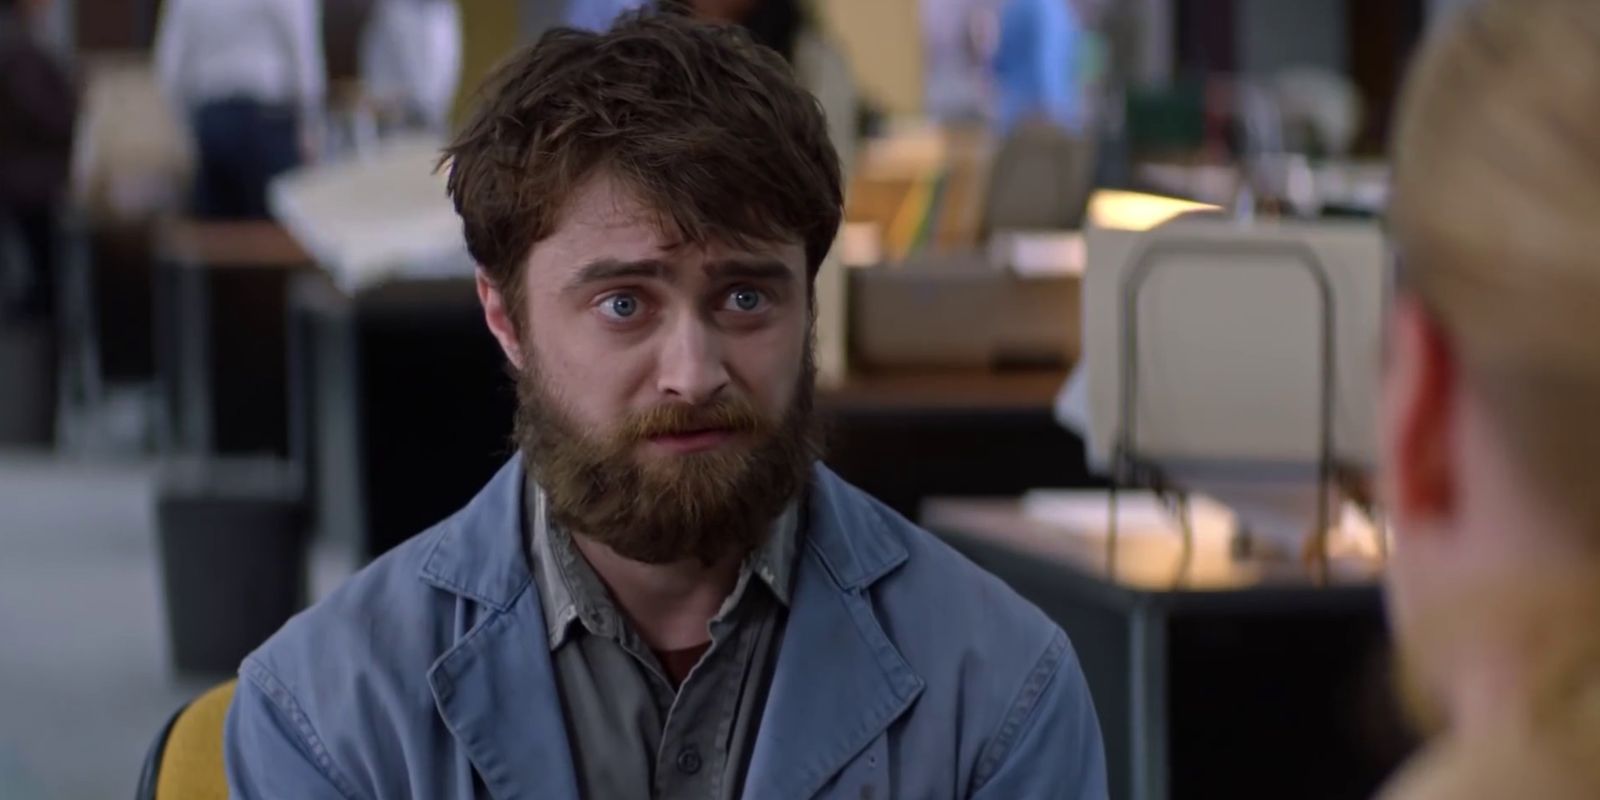 Harry Potter Actor Daniel Radcliffe Was Once Given $5 After Being Mistaken For A Homeless Man!